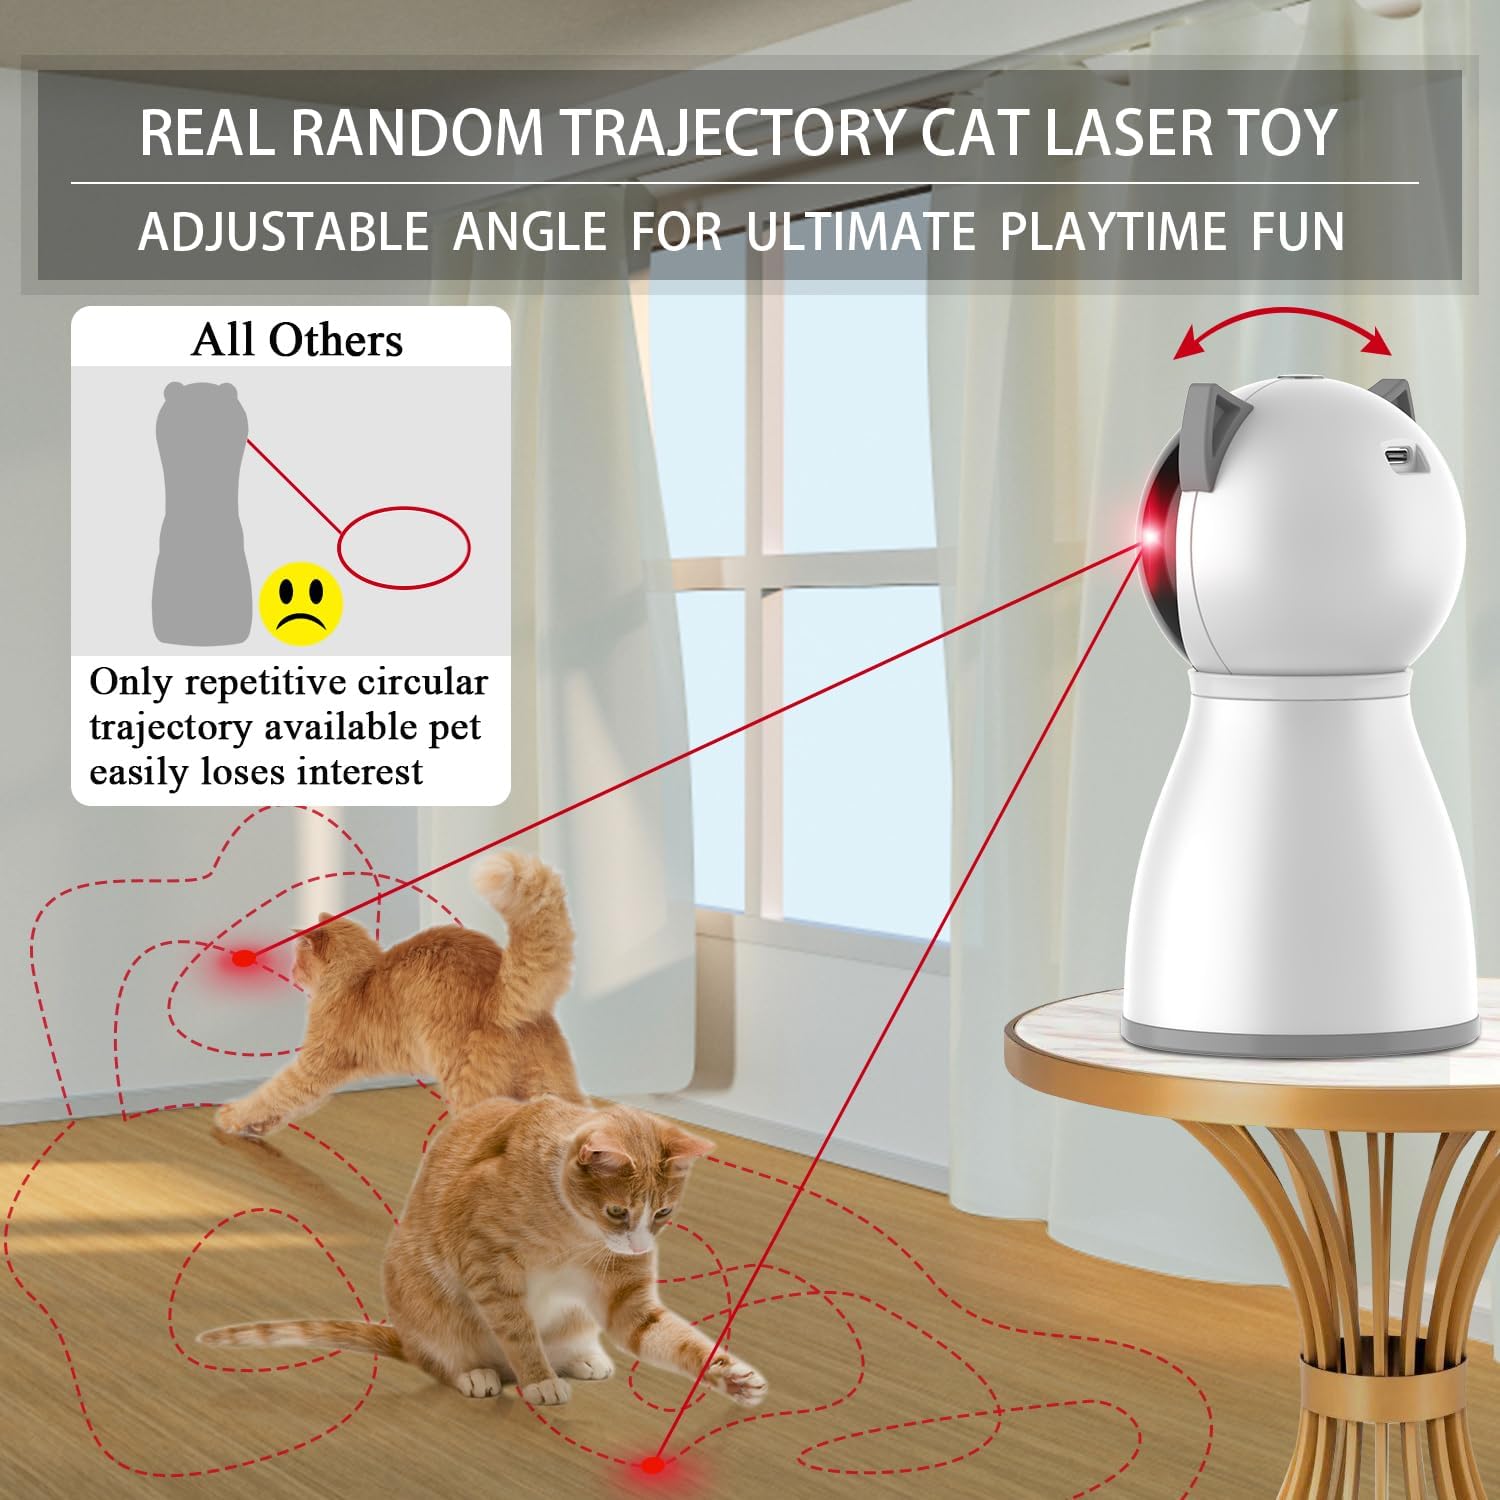 LIFE Cat Toys,The 4th Generation Real Random Trajectory,Motion Activated Rechargeable Automatic Cat Laser Toy,Interactive Cat Toys for Indoor Cats/Kittens/Dogs